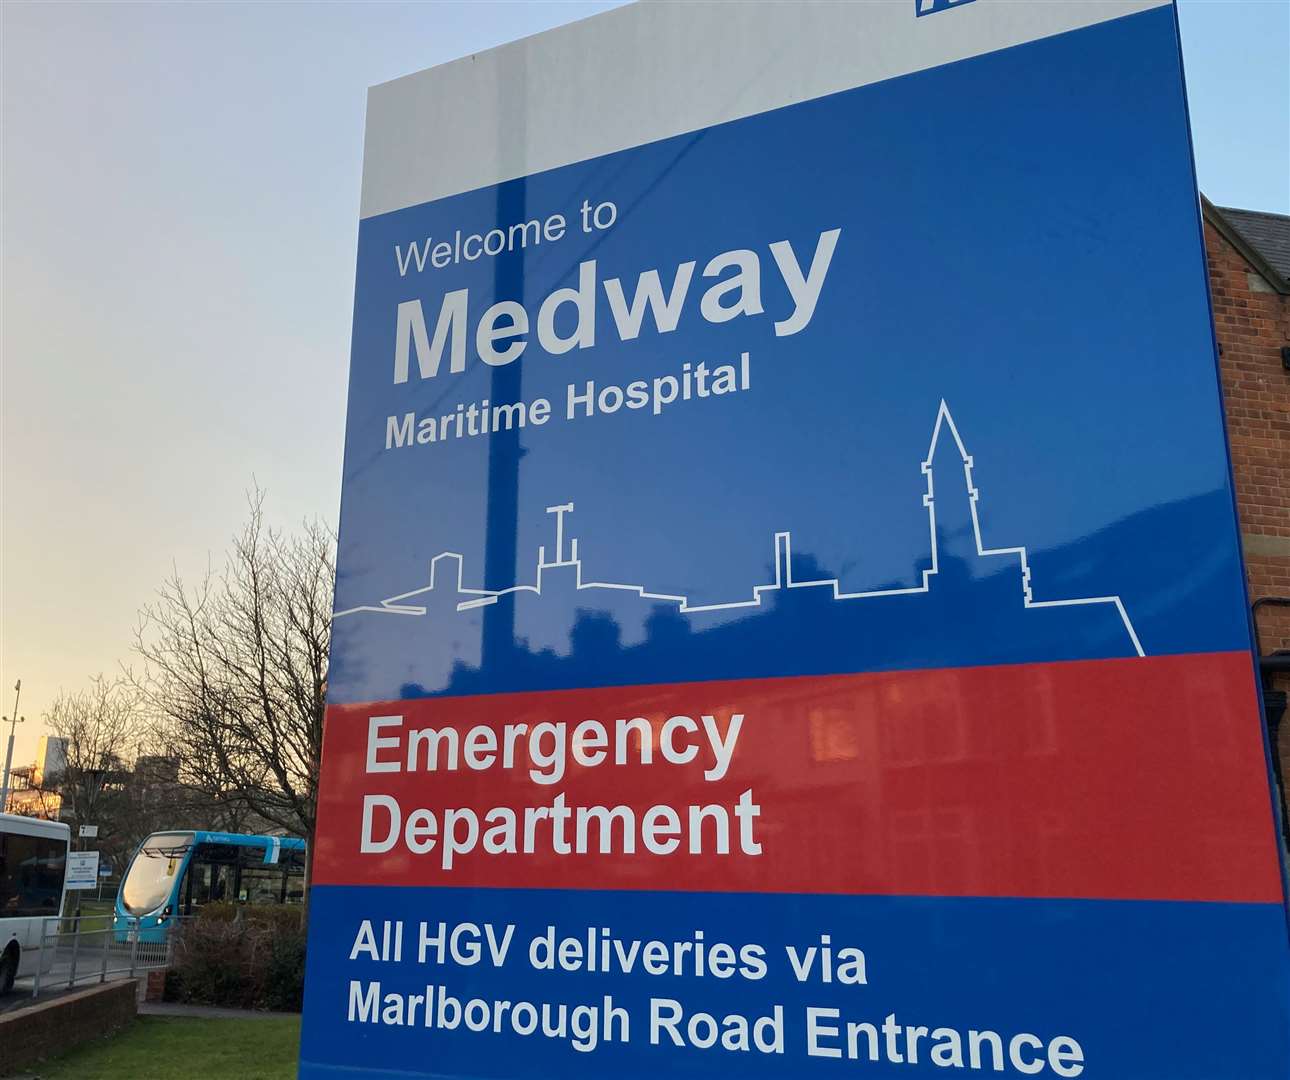 Two victims were taken to Medway Maritime Hospital in Windmill Road, Gillingham